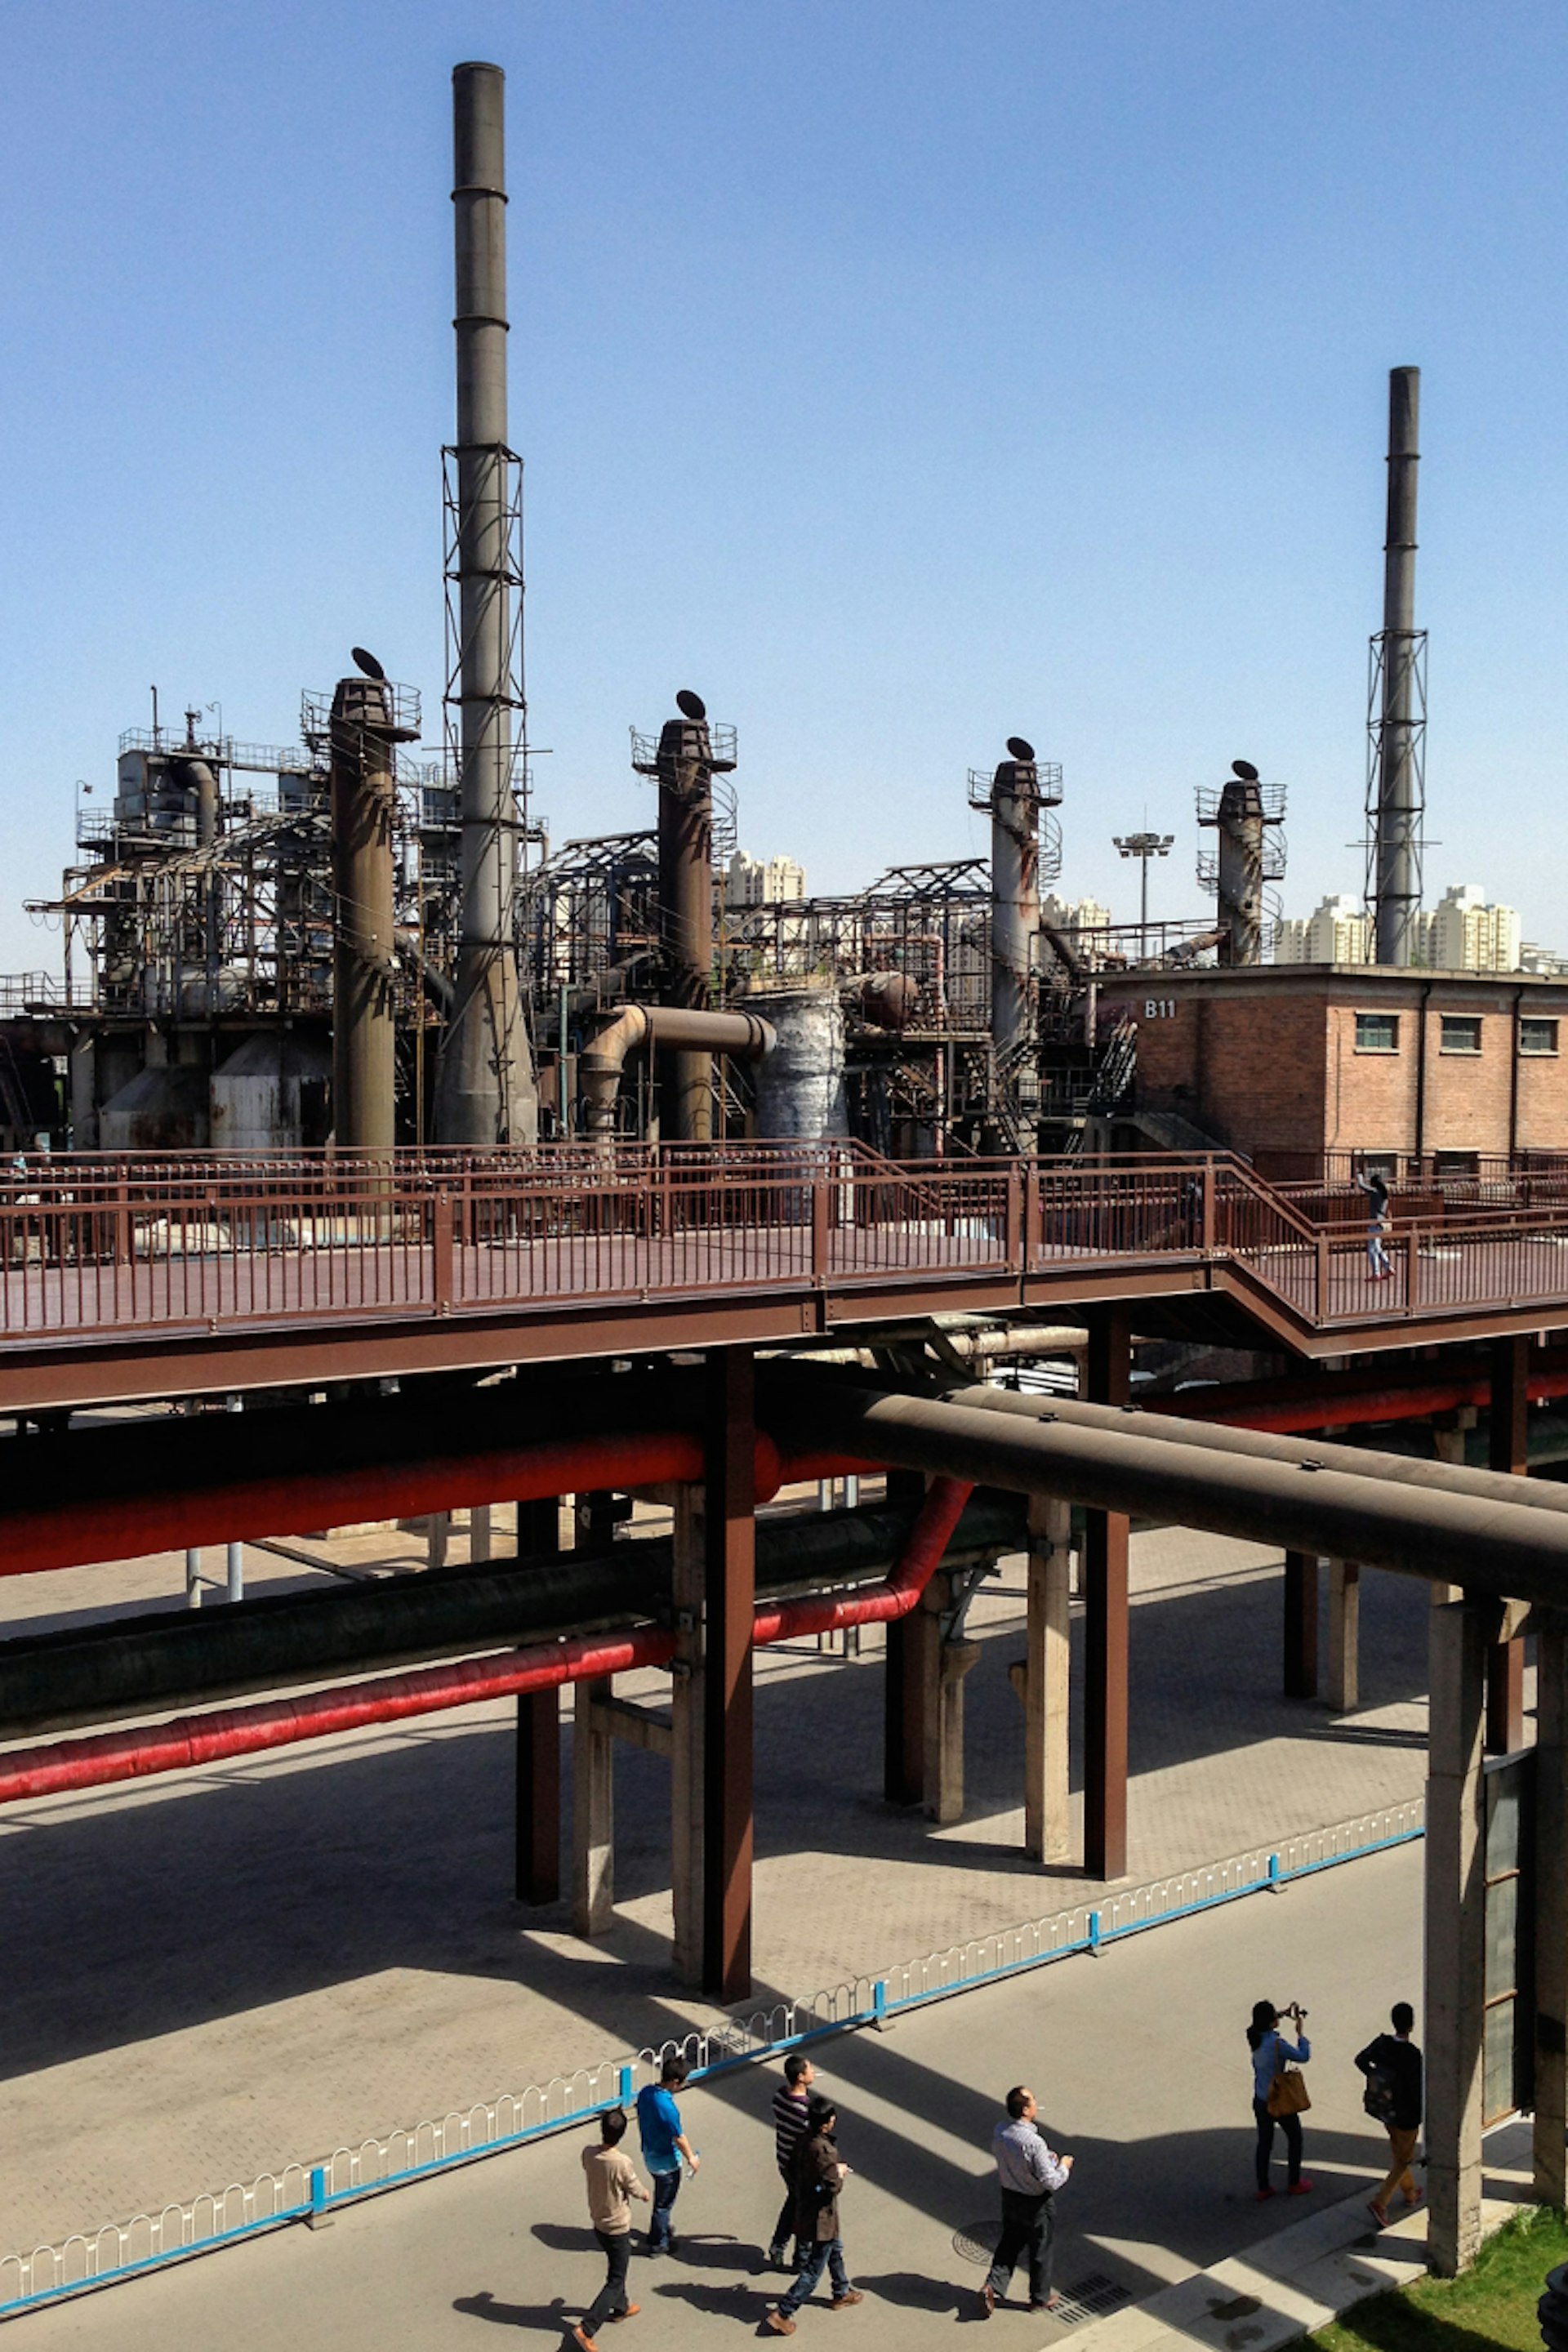 Industrial playground: the 'steampunk' chimneys of D-Park © Tom O'Malley / Lonely Planet